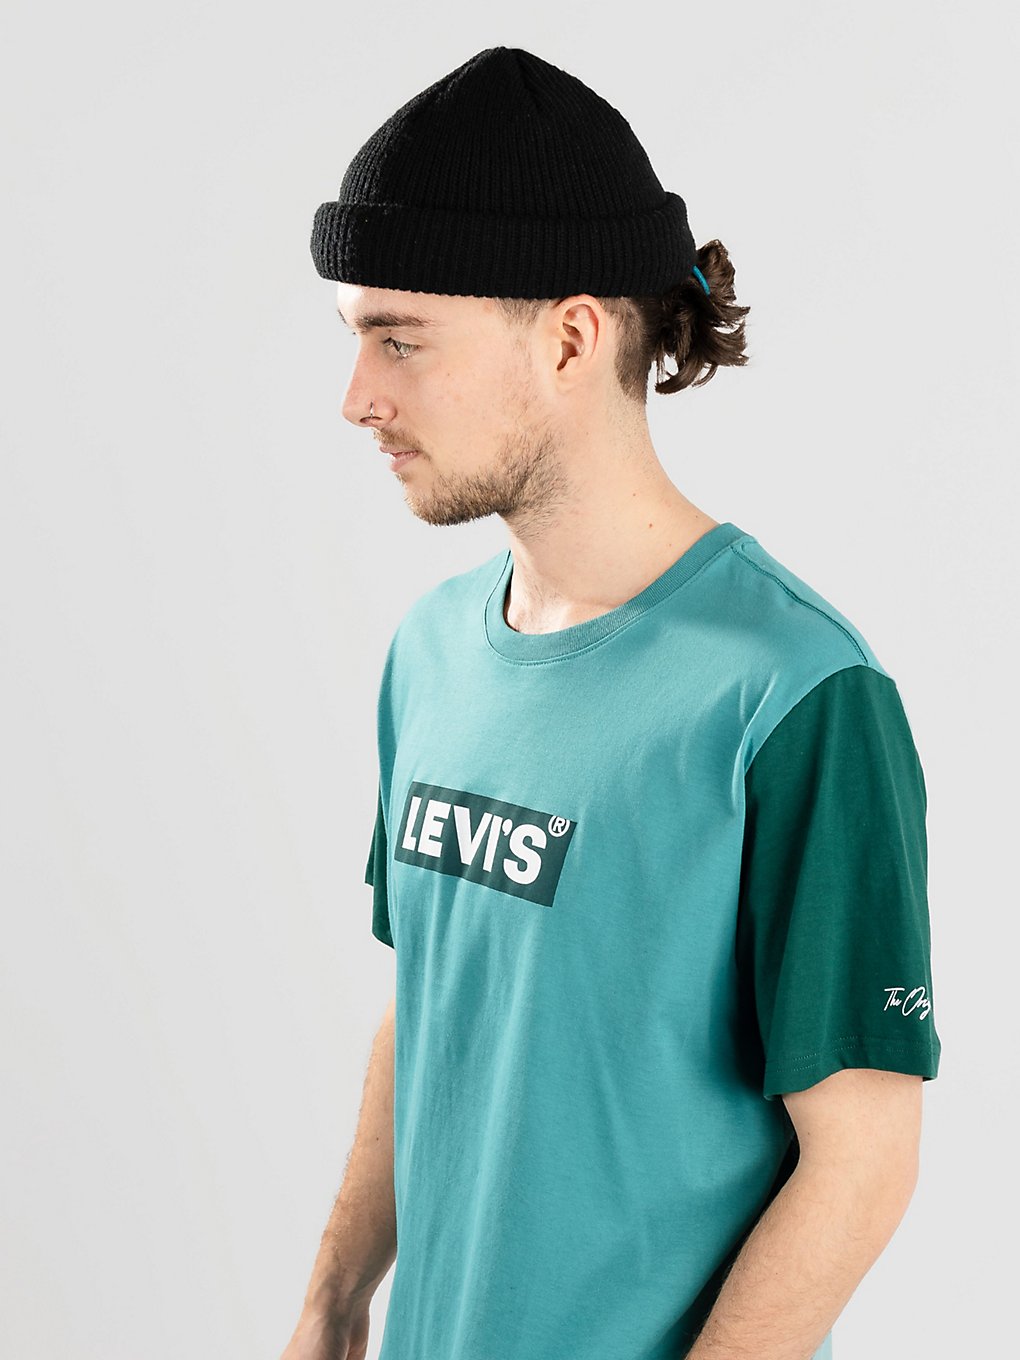 Levi's Relaxed Fit Reds T-Shirt groen